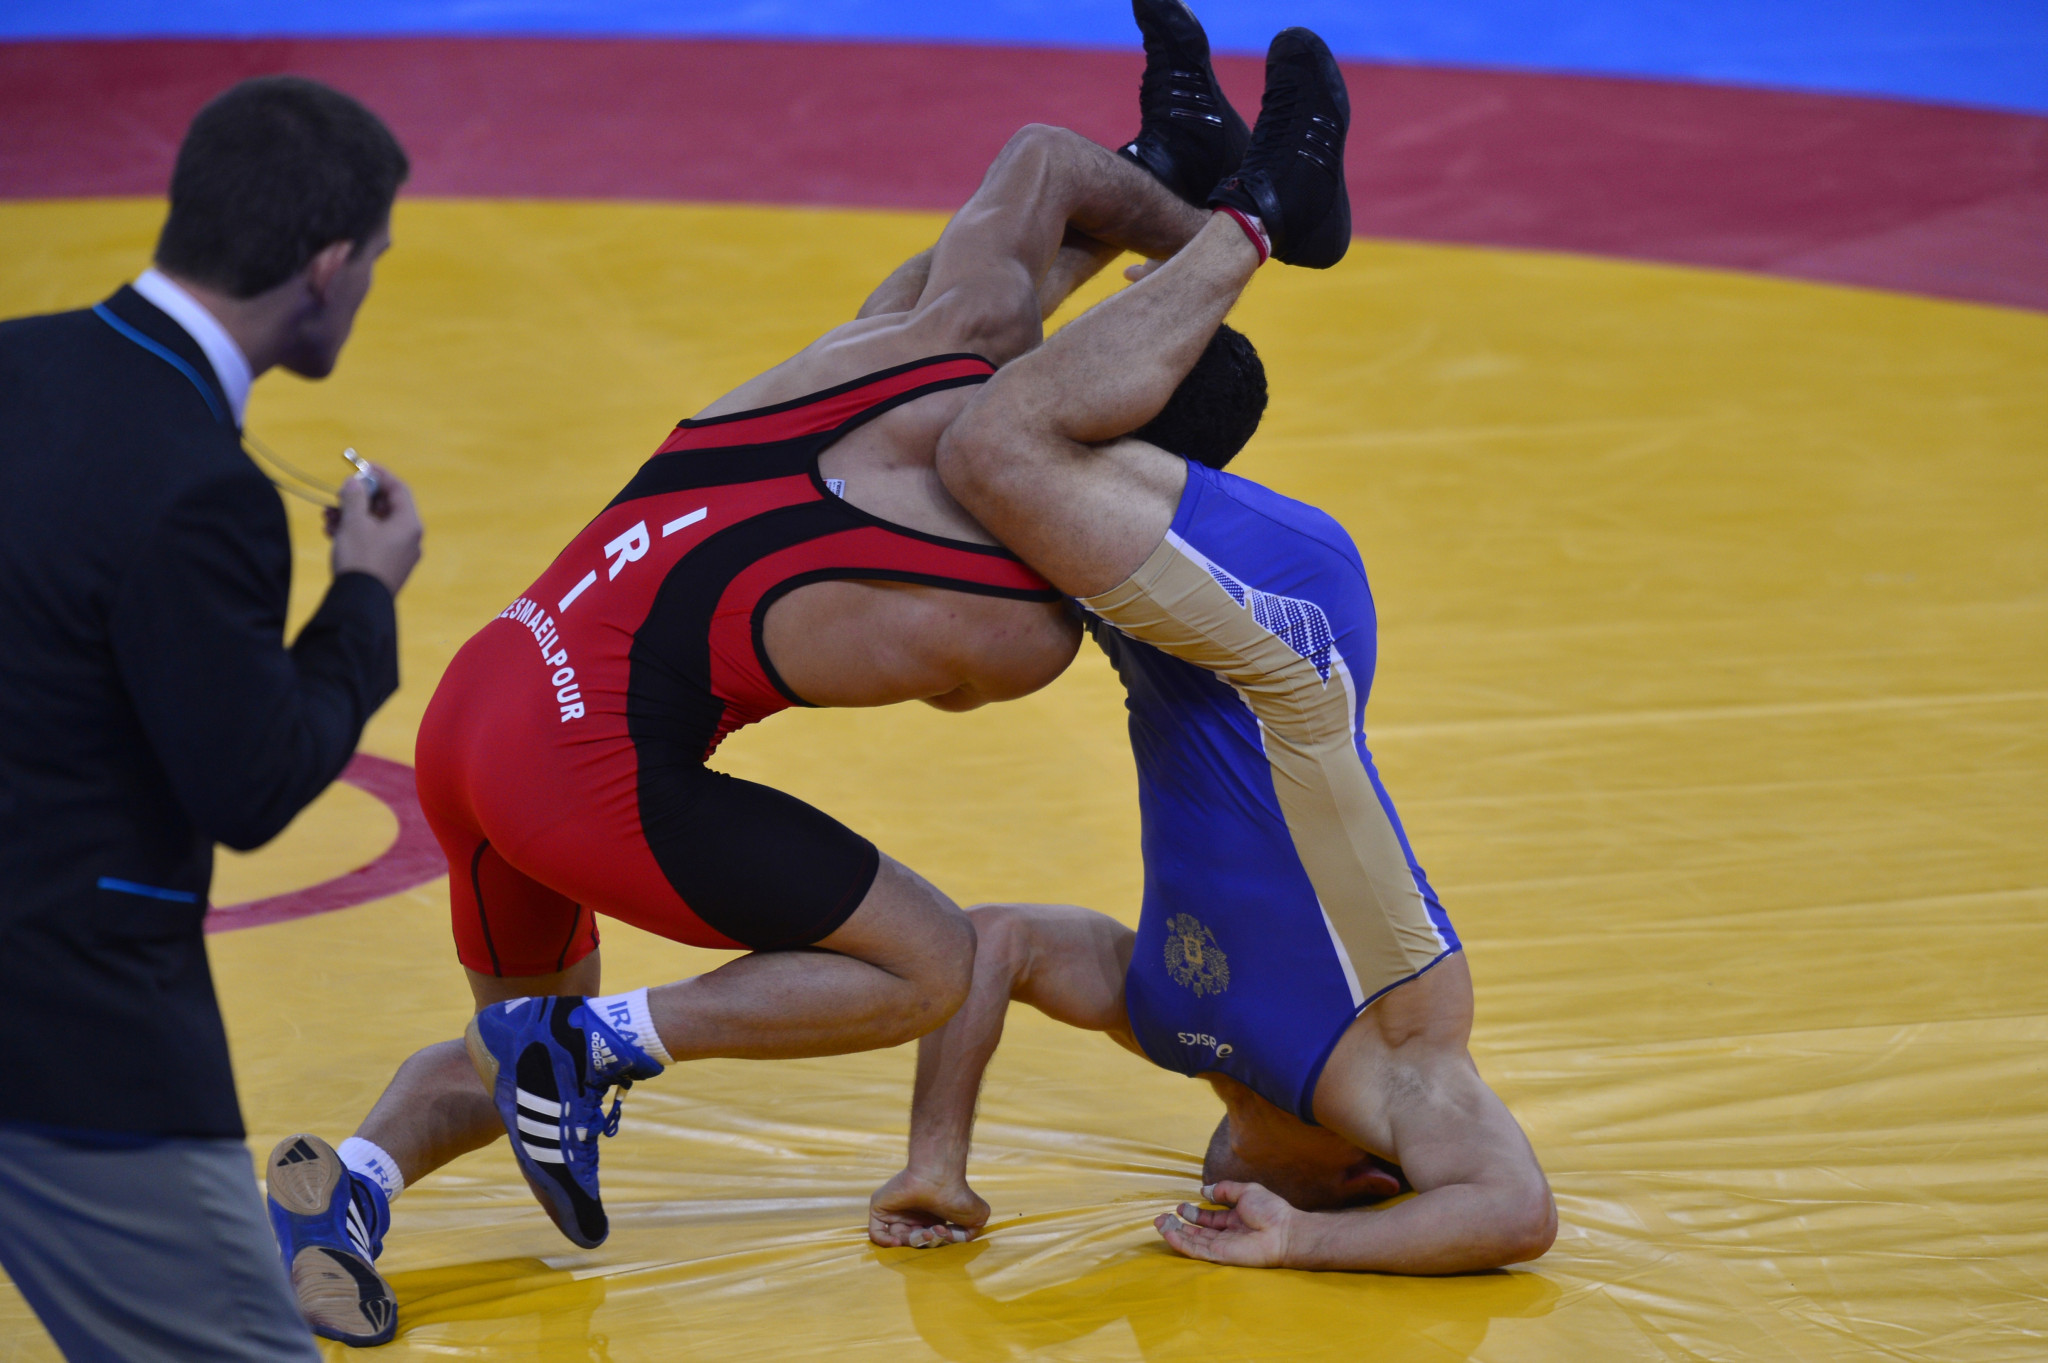 Masoud Esmaeilpour, in red, lost to the eventual runner-up at London 2012 ©Getty Images